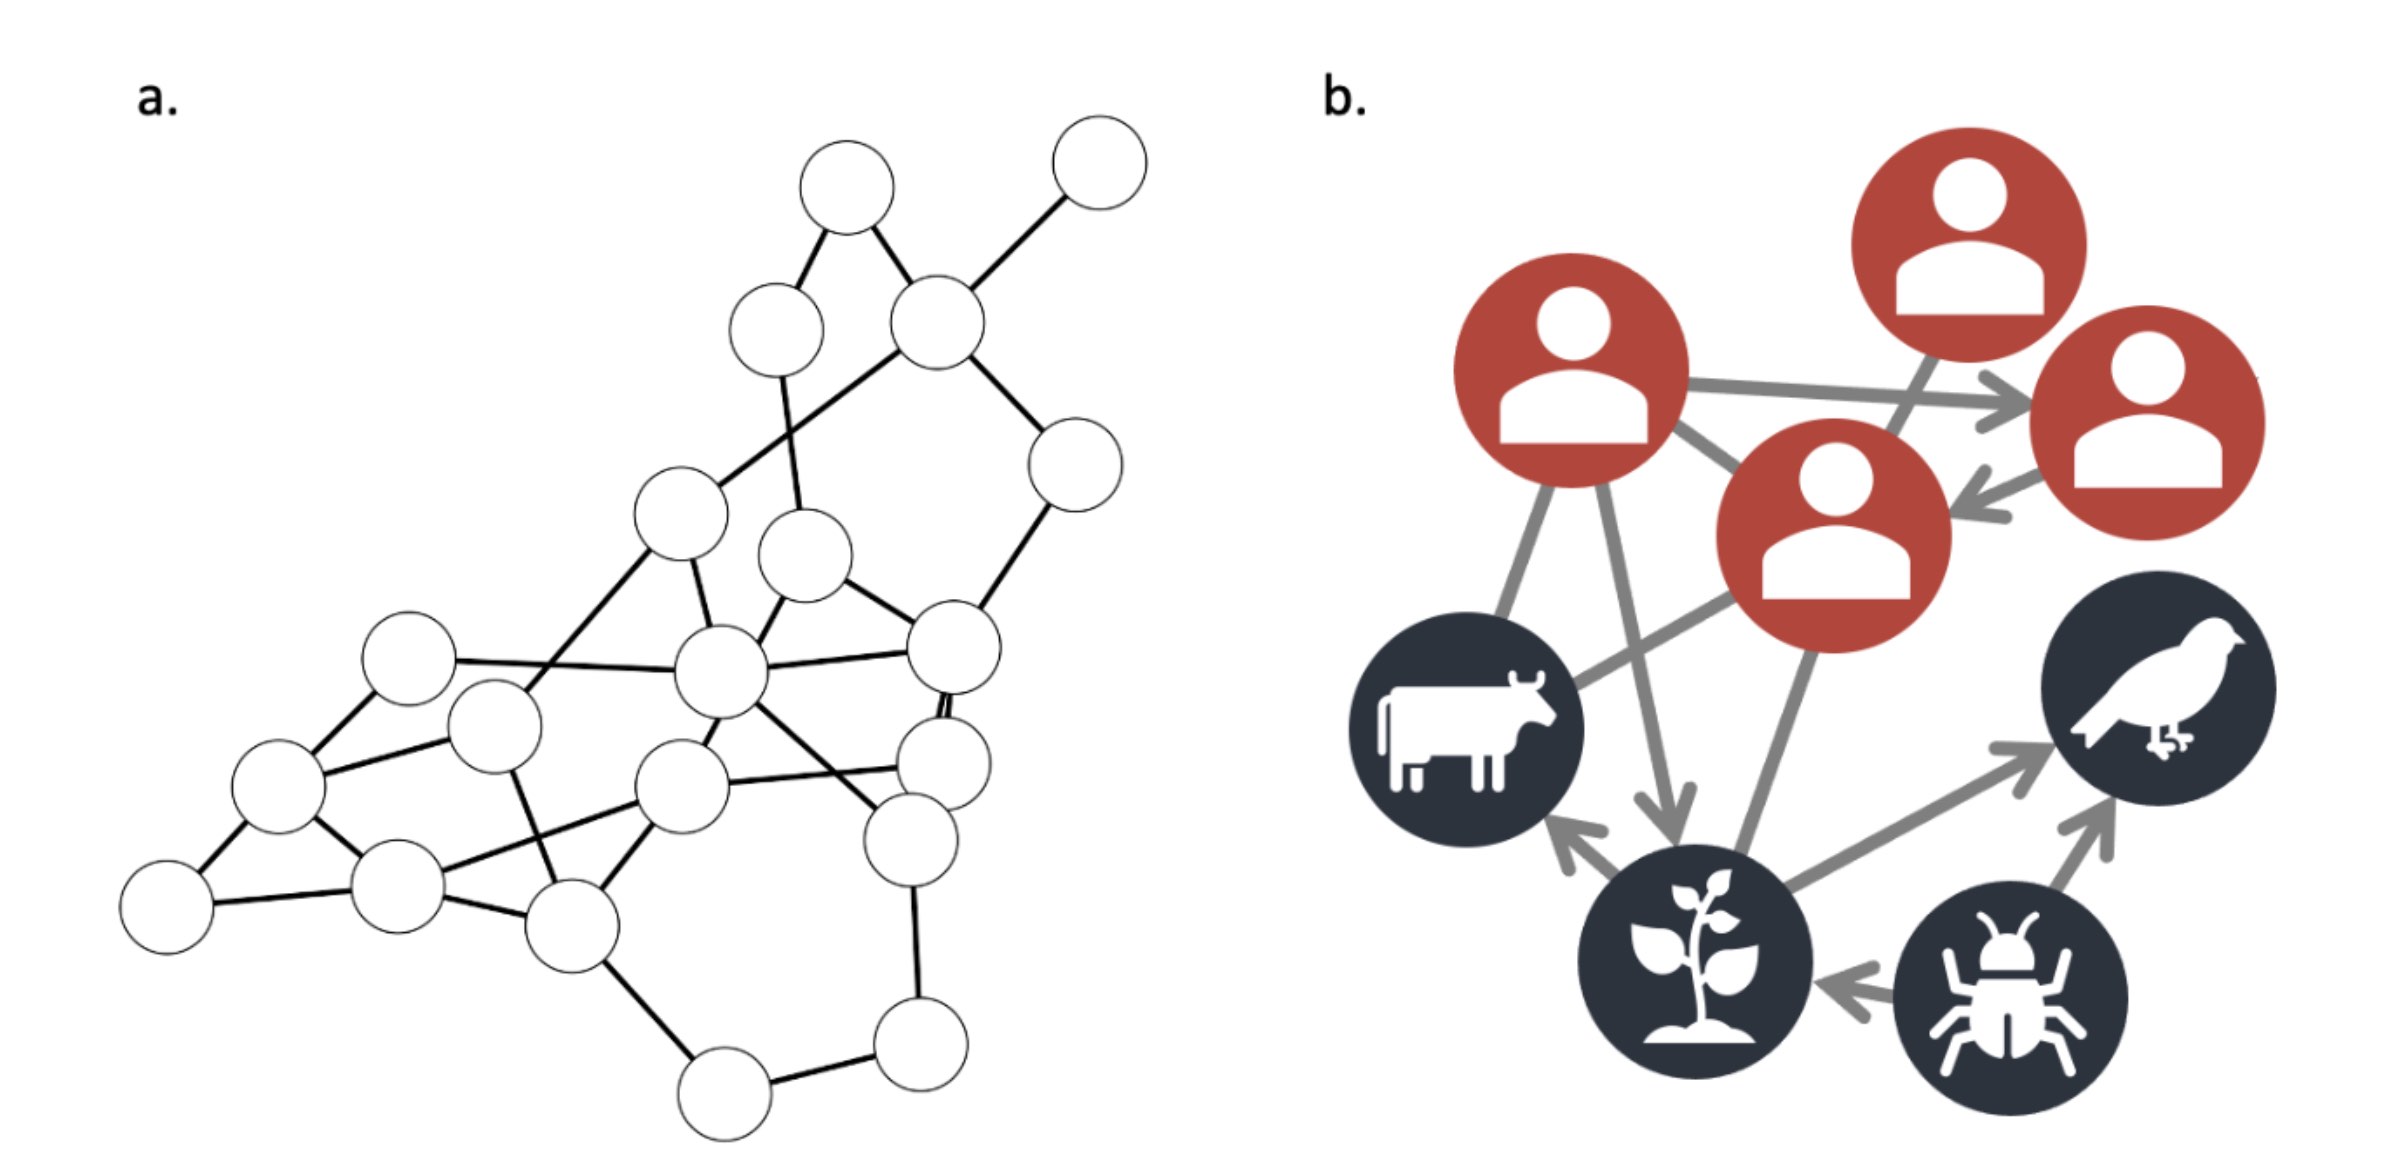  Network graph and socio-ecological network